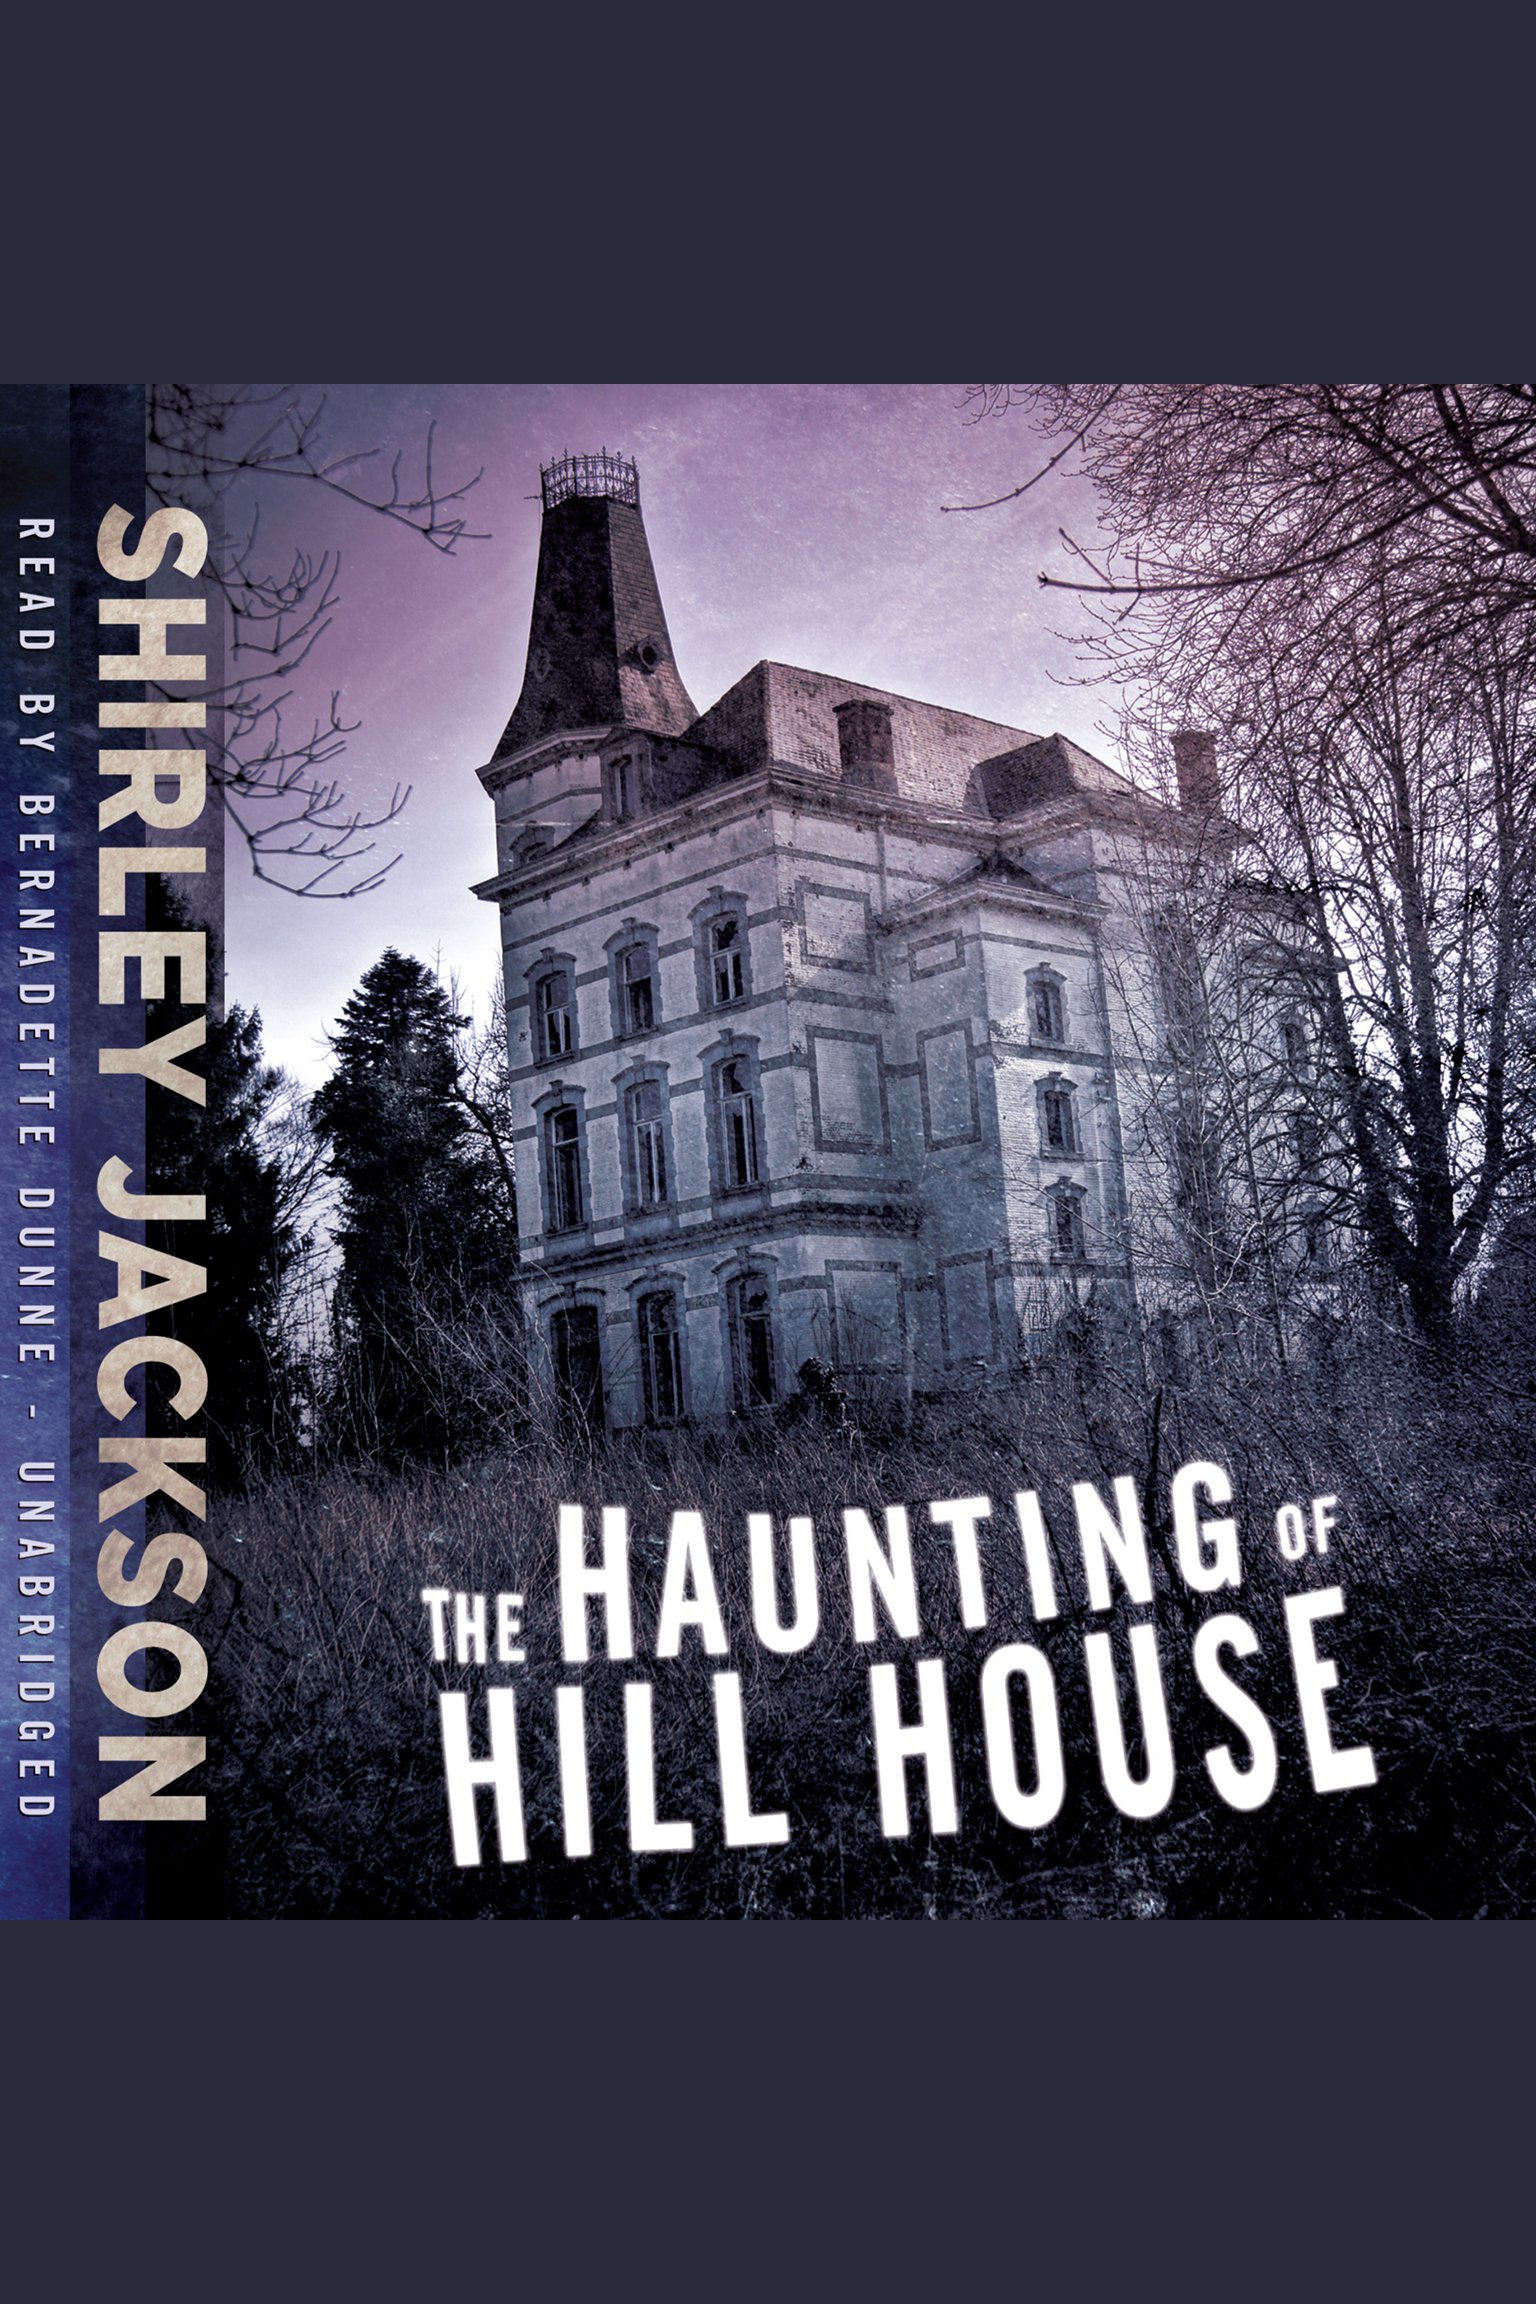 The Haunting of Hill House cover image